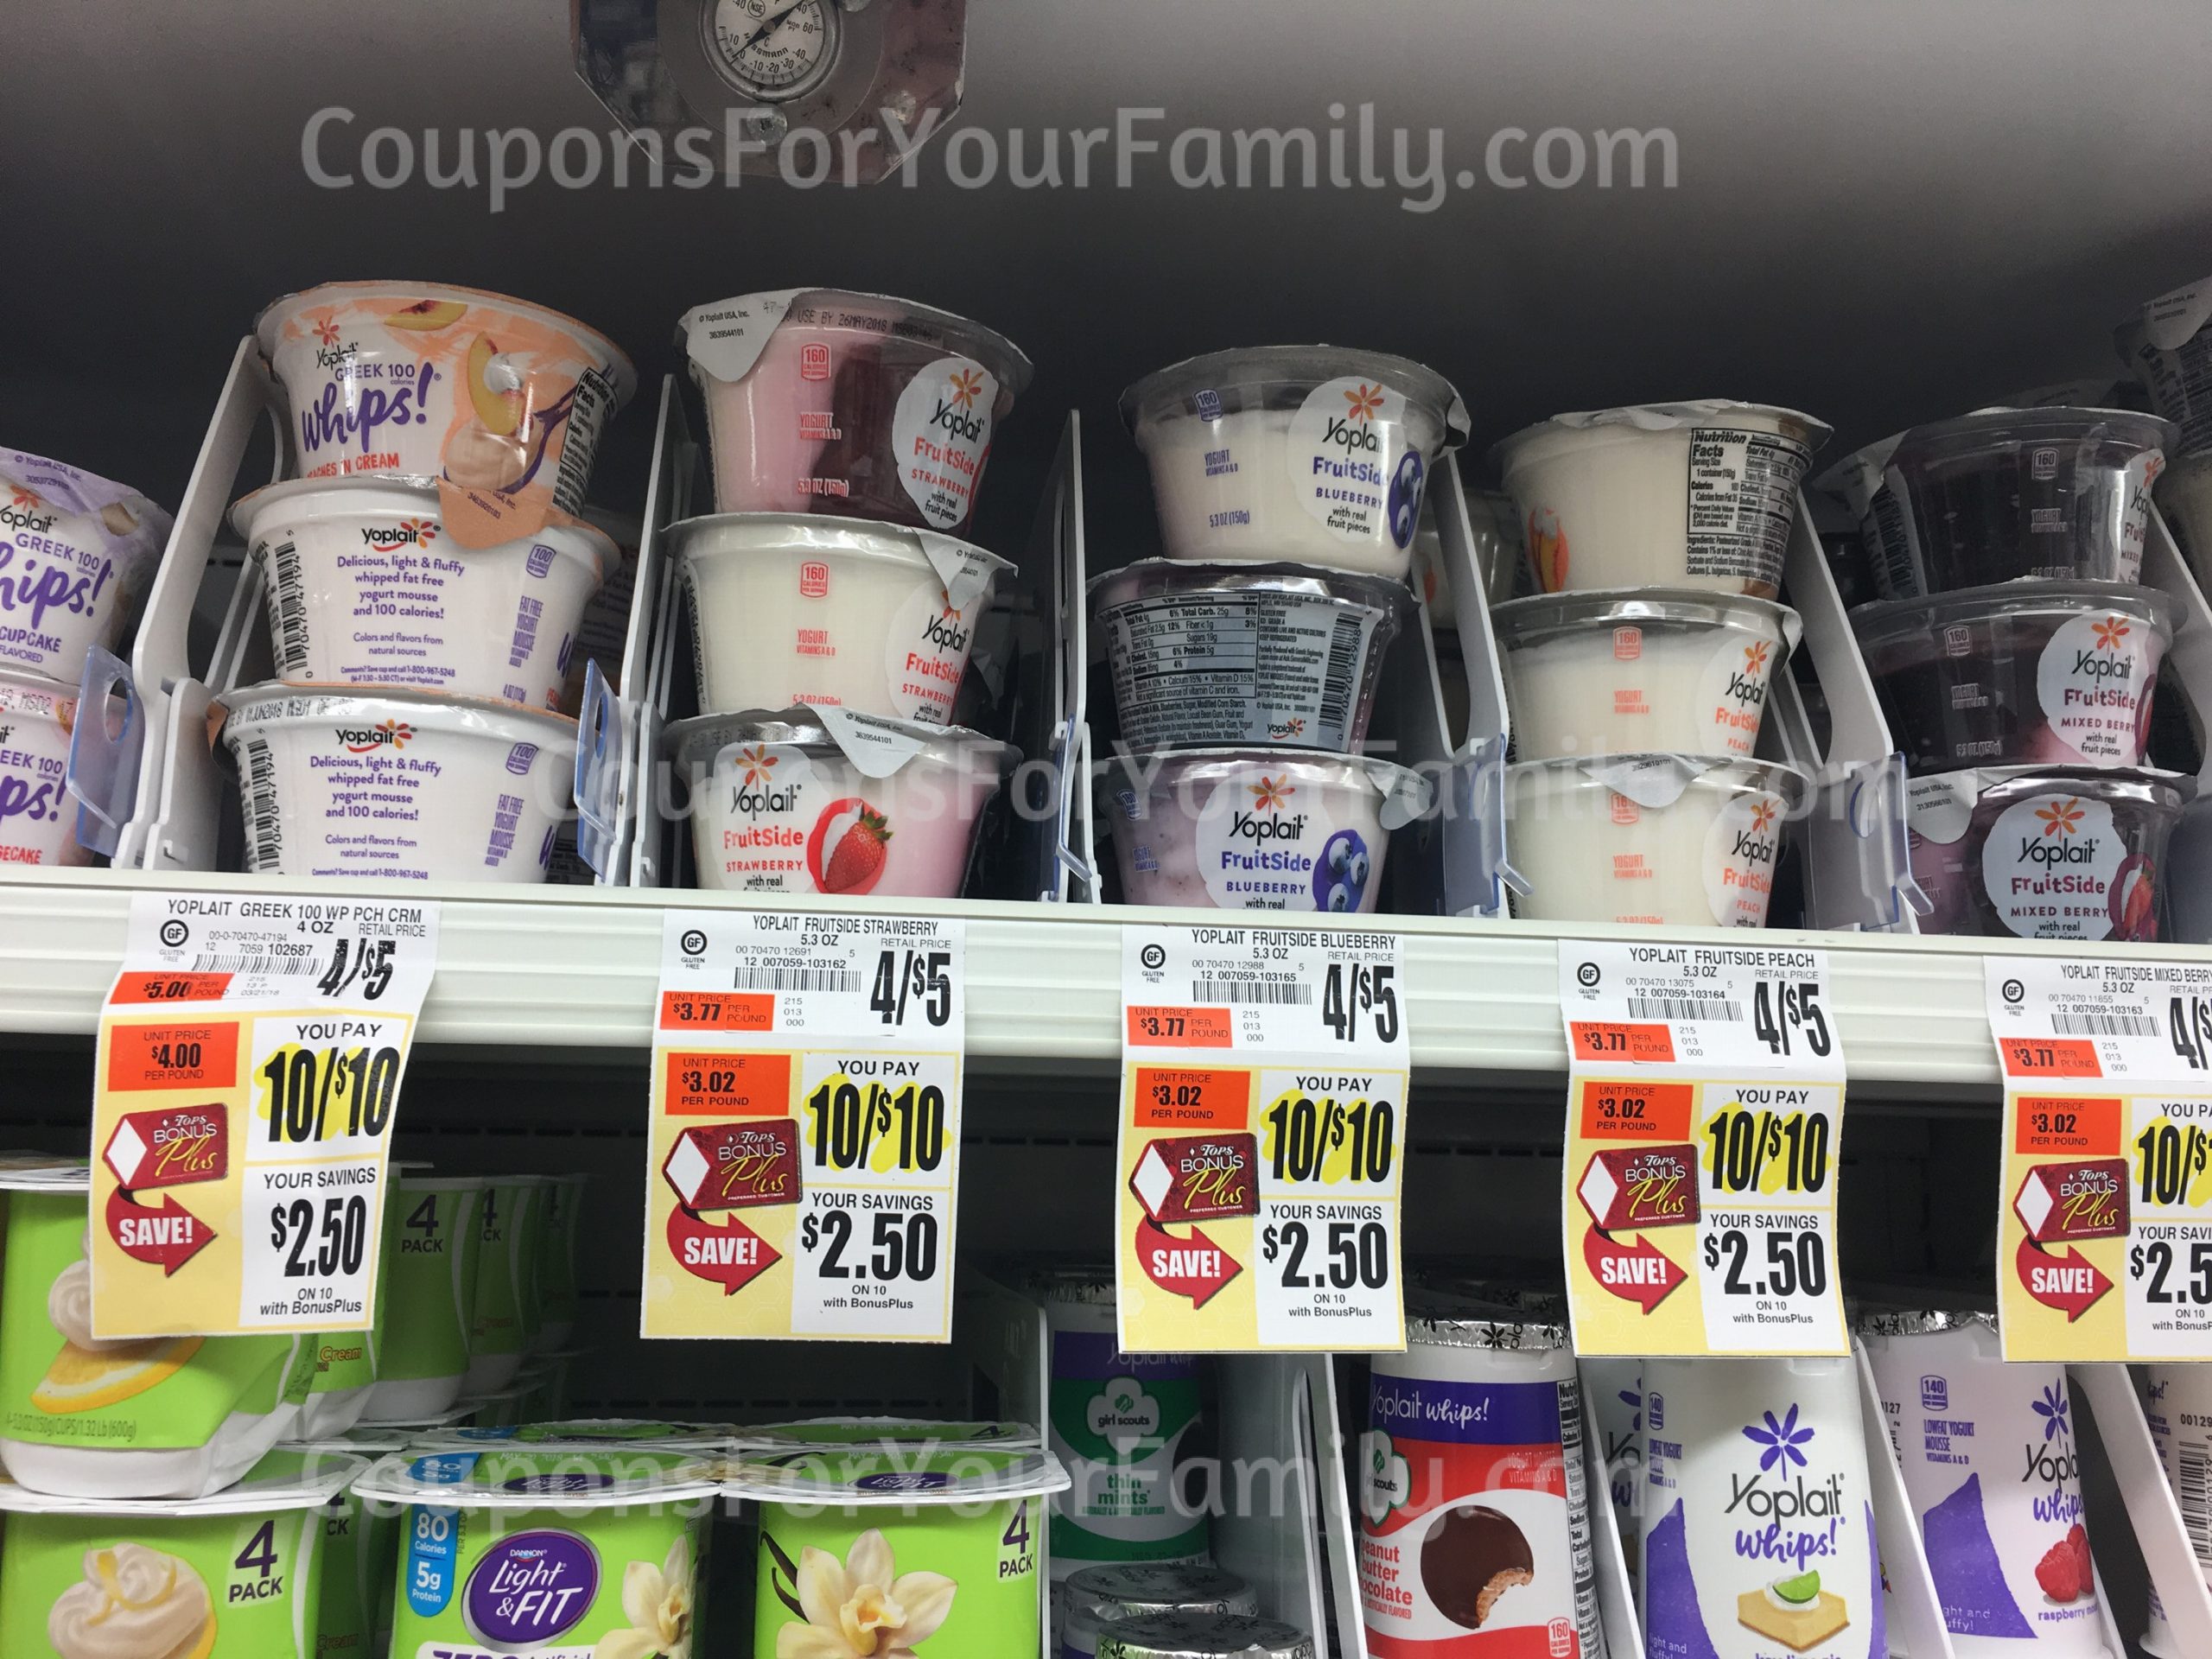 New Yoplait Yogurt Coupons makes for as low as $.20 each ...